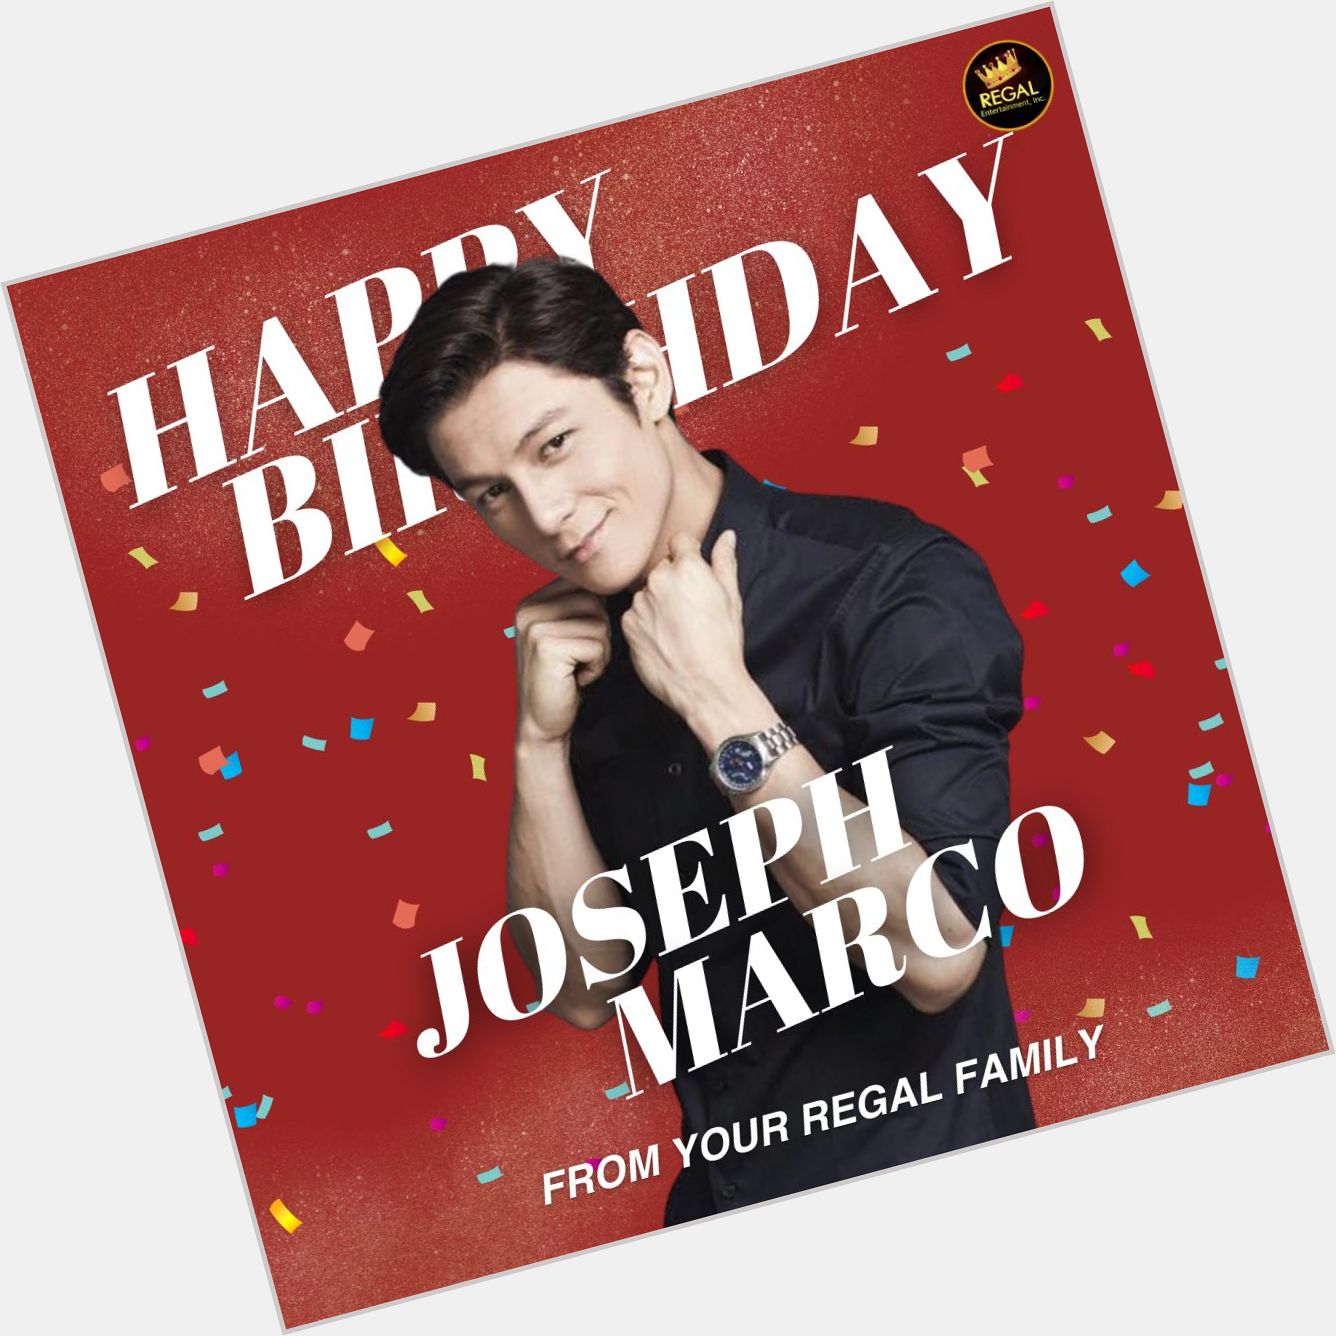 Happy Birthday, Joseph Marco! We wish you all the best in life! From your Regal Family!  